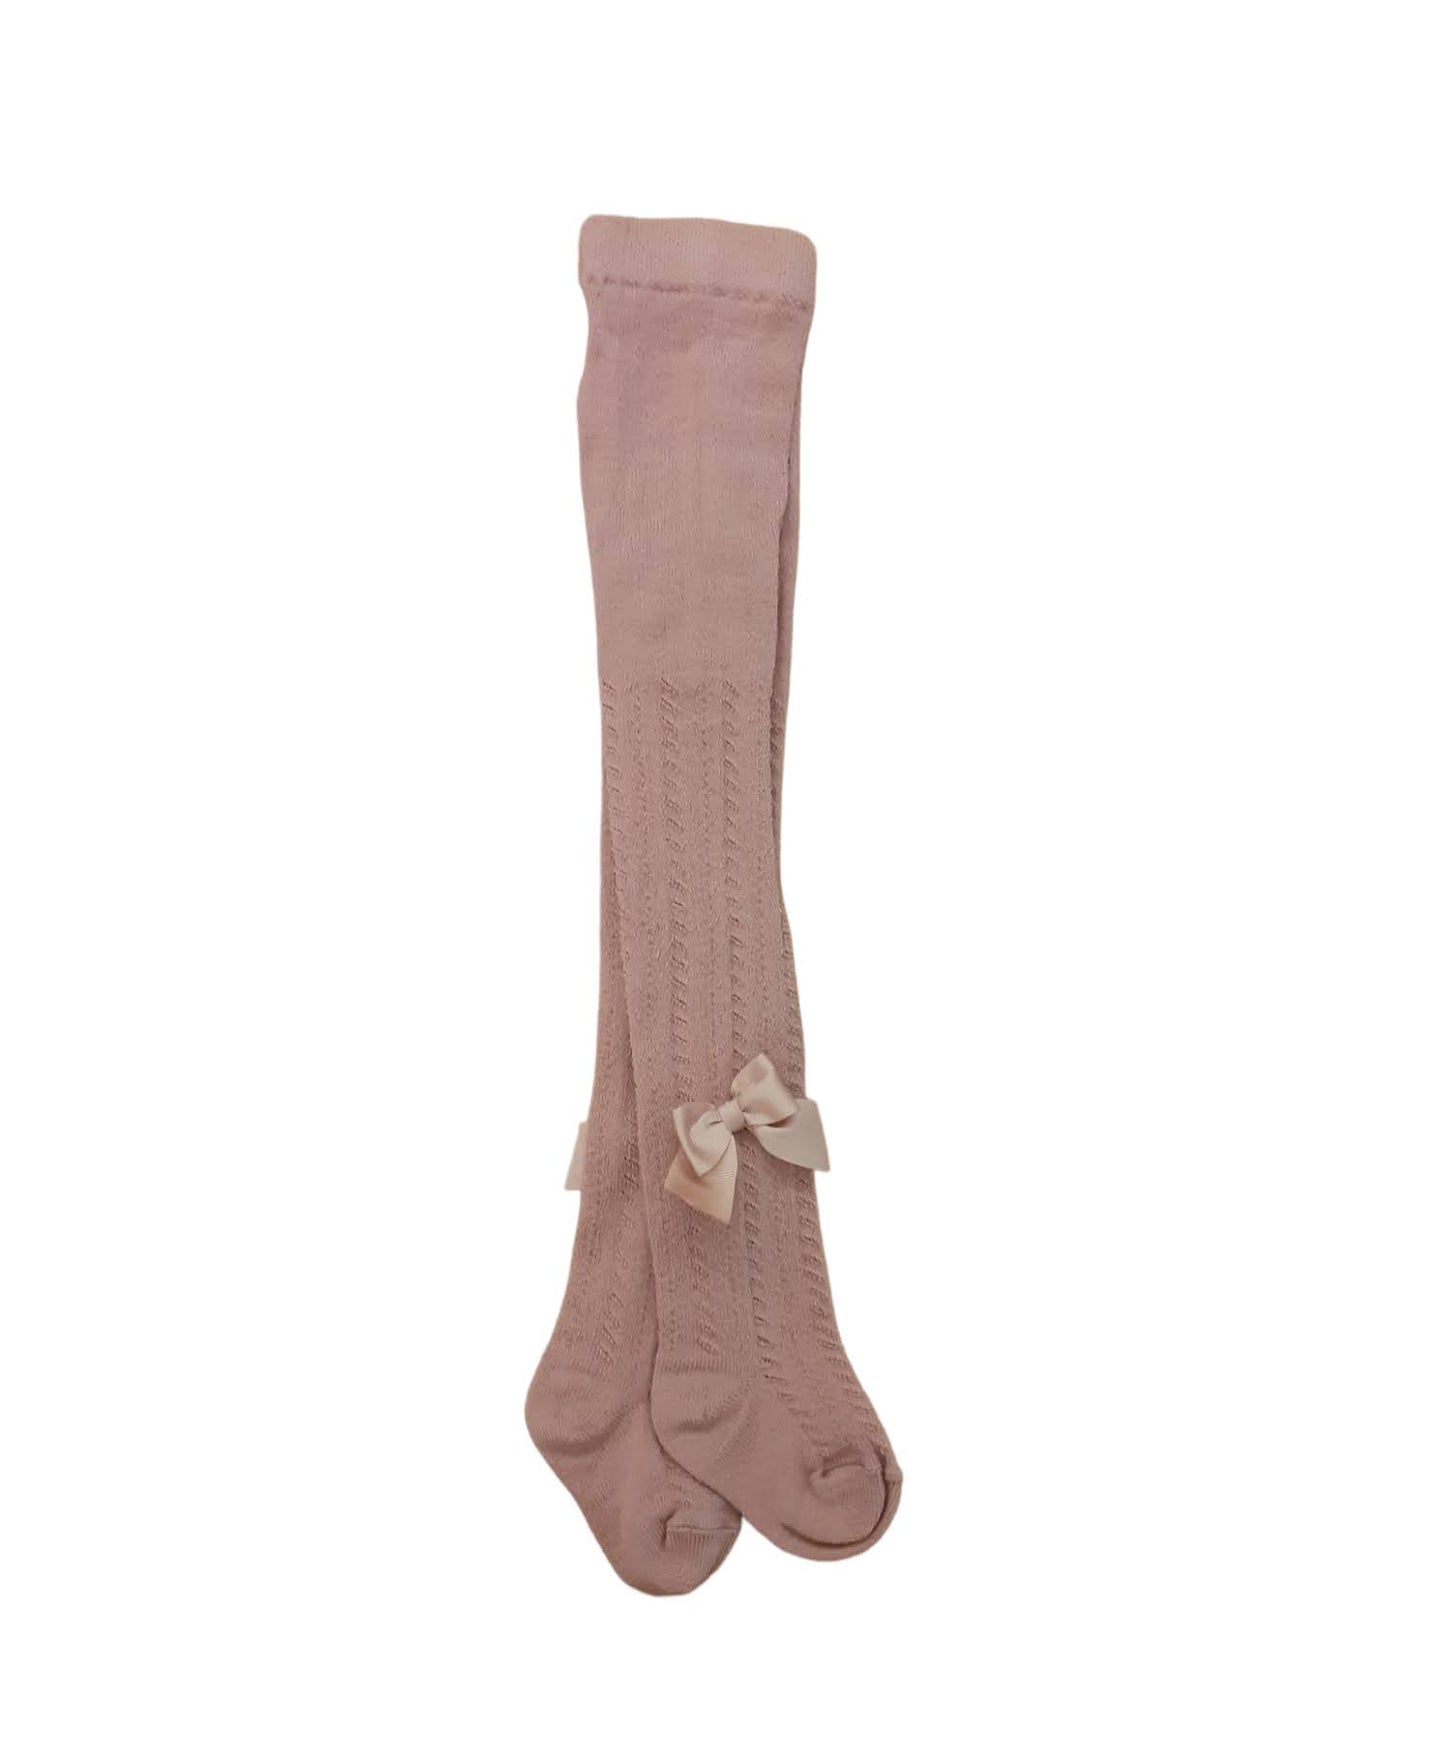 STORY LORIS Perforated tights with bow in warm antique pink cotton